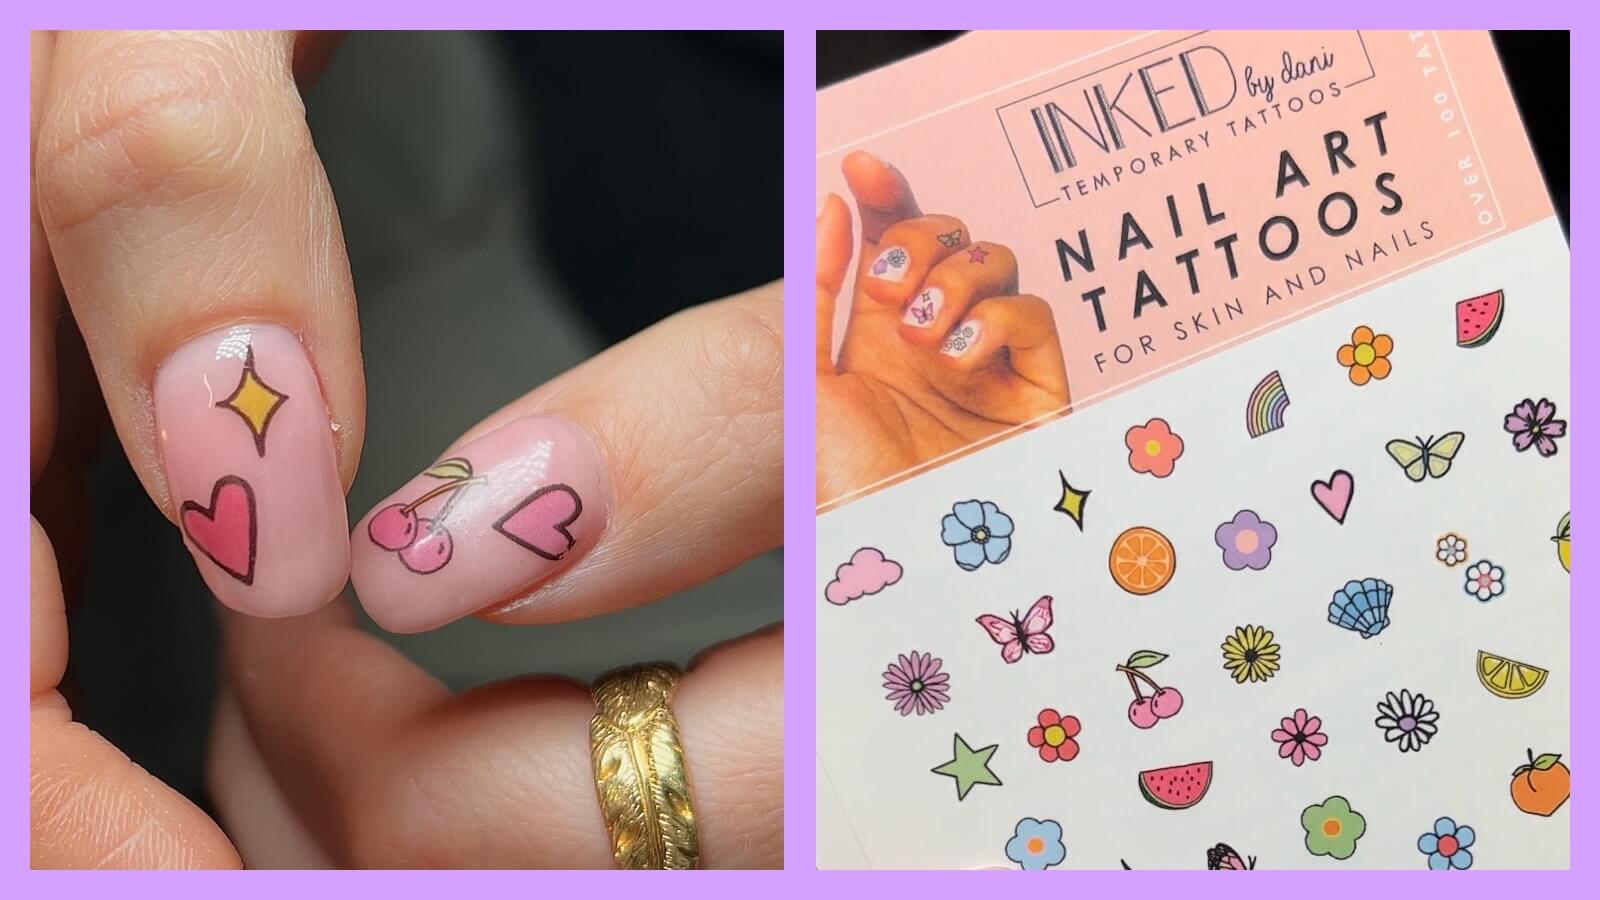 INKED By Dani x Nails By Mei Mini Temporary Tattoos & Nail Art | Urban  Outfitters New Zealand Official Site